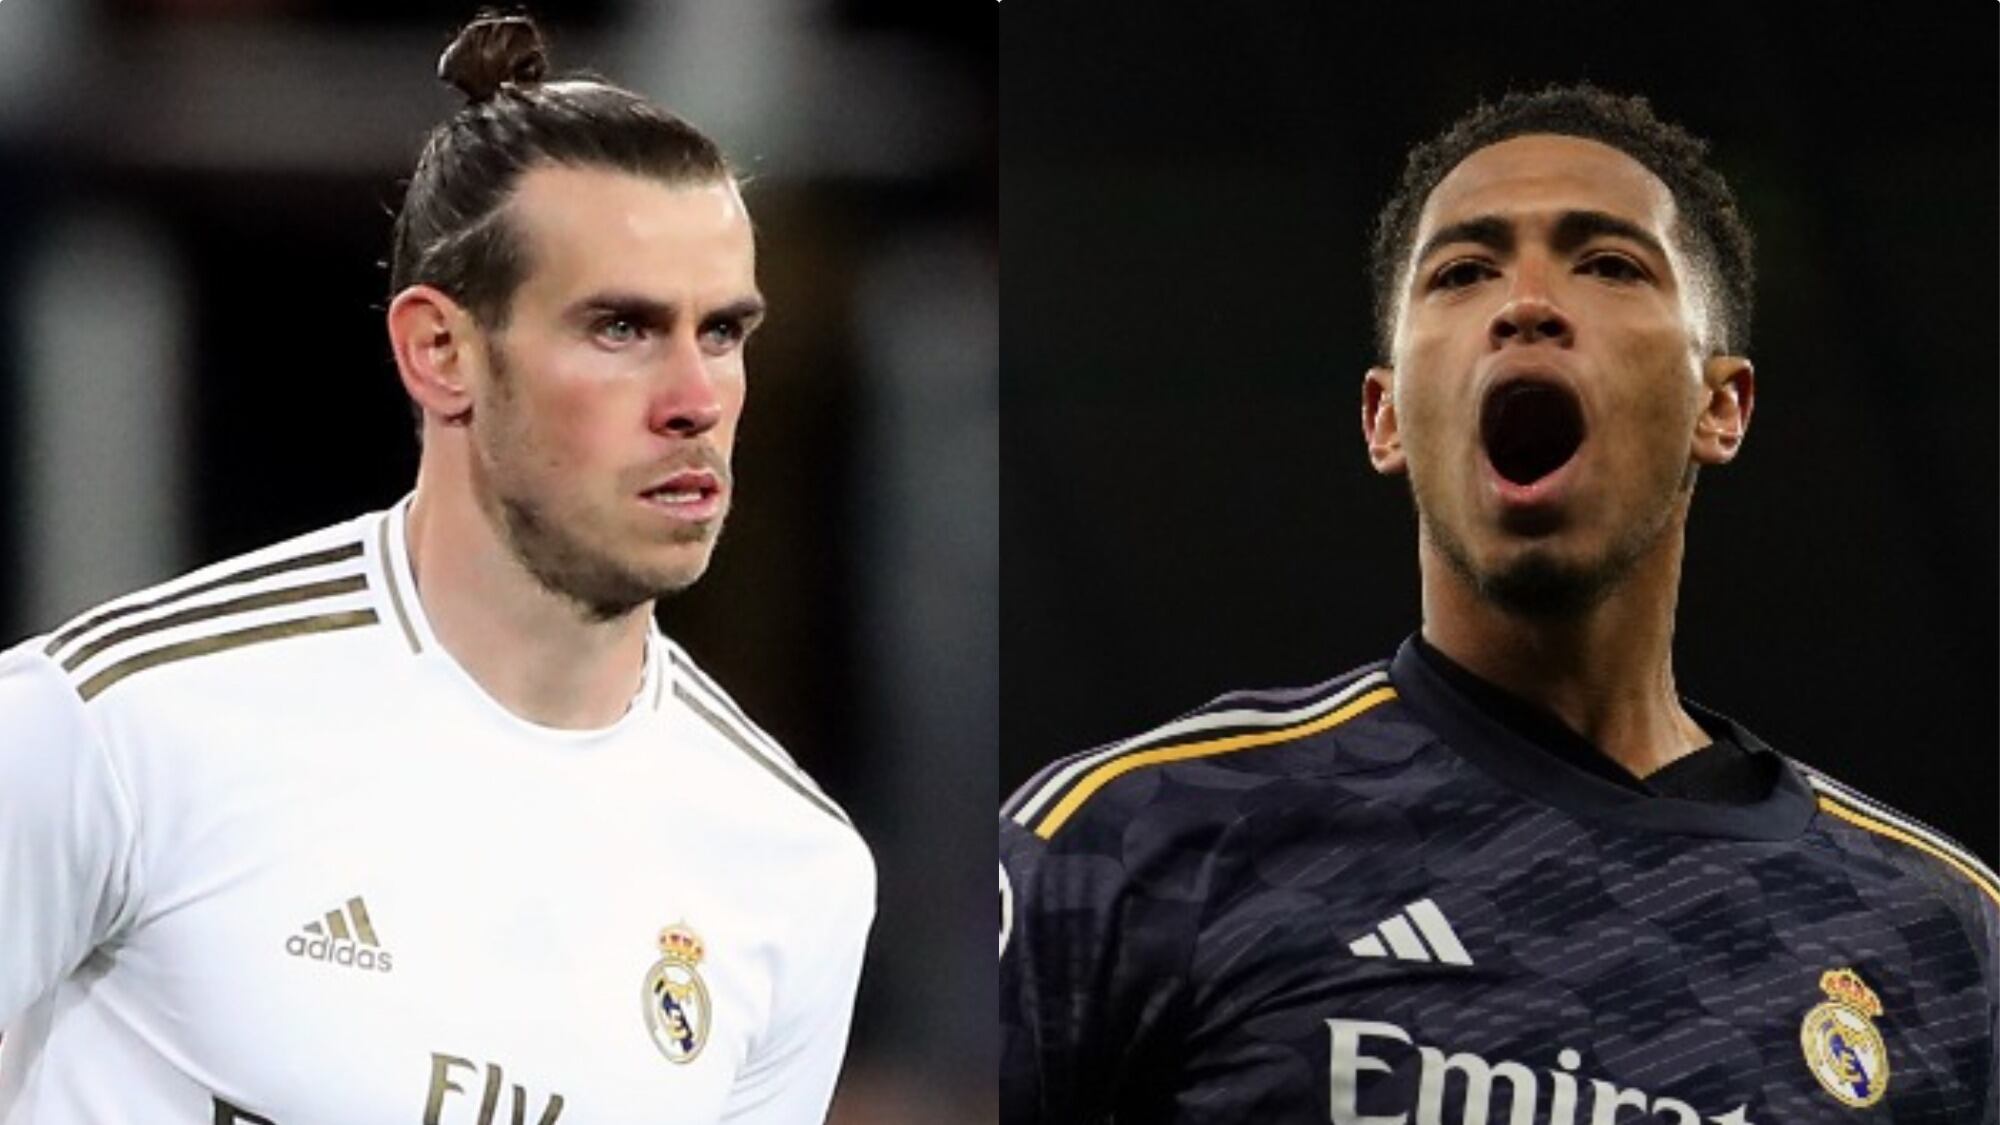 Gareth Bale believes England’s Real Madrid midfielder Jude Bellingham has a strong case to win the Ballon d’Or this year